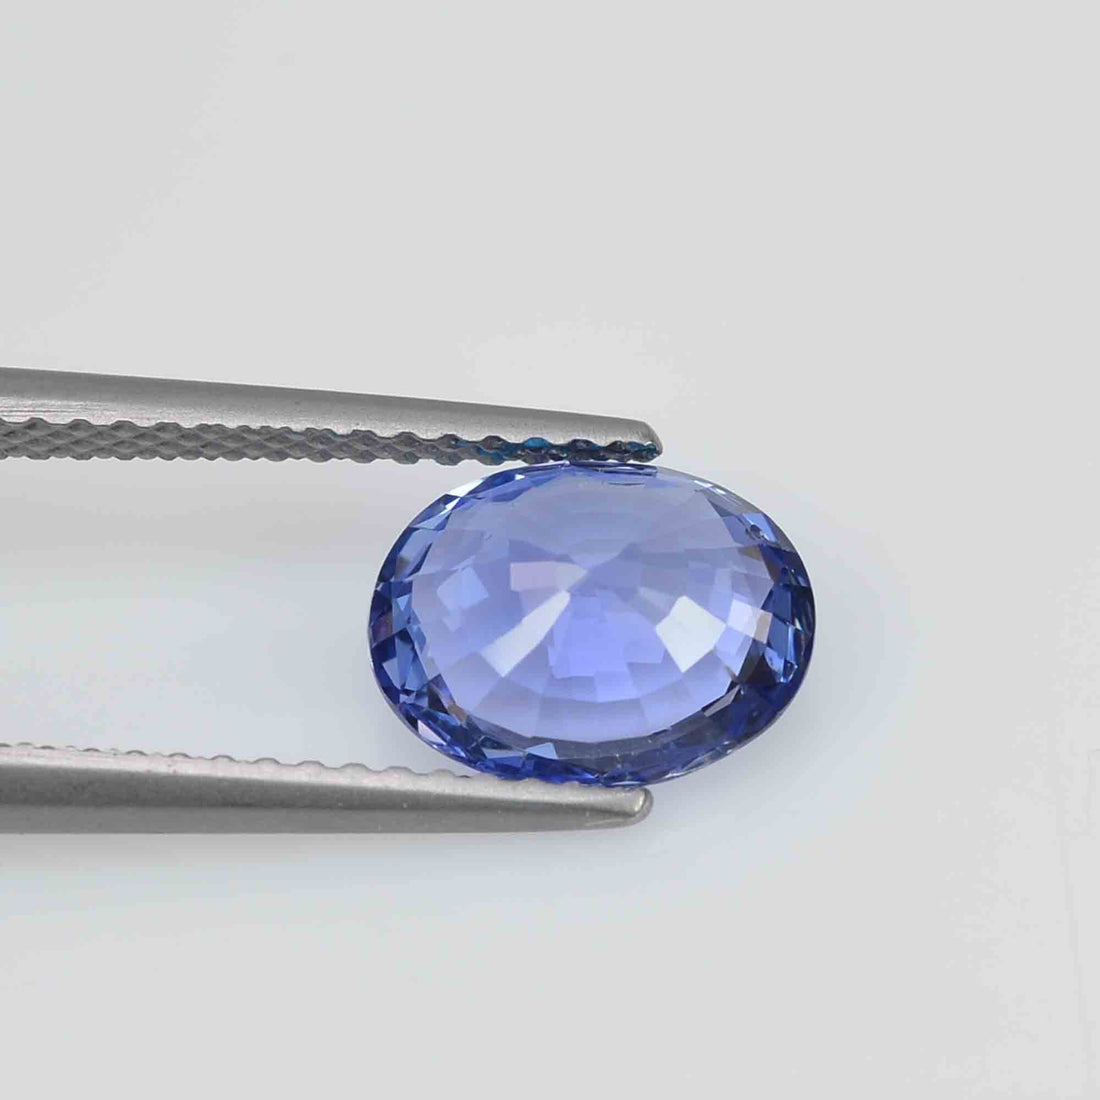 2.16 cts Unheated Natural Blue Sapphire Loose Gemstone Oval Cut Certified